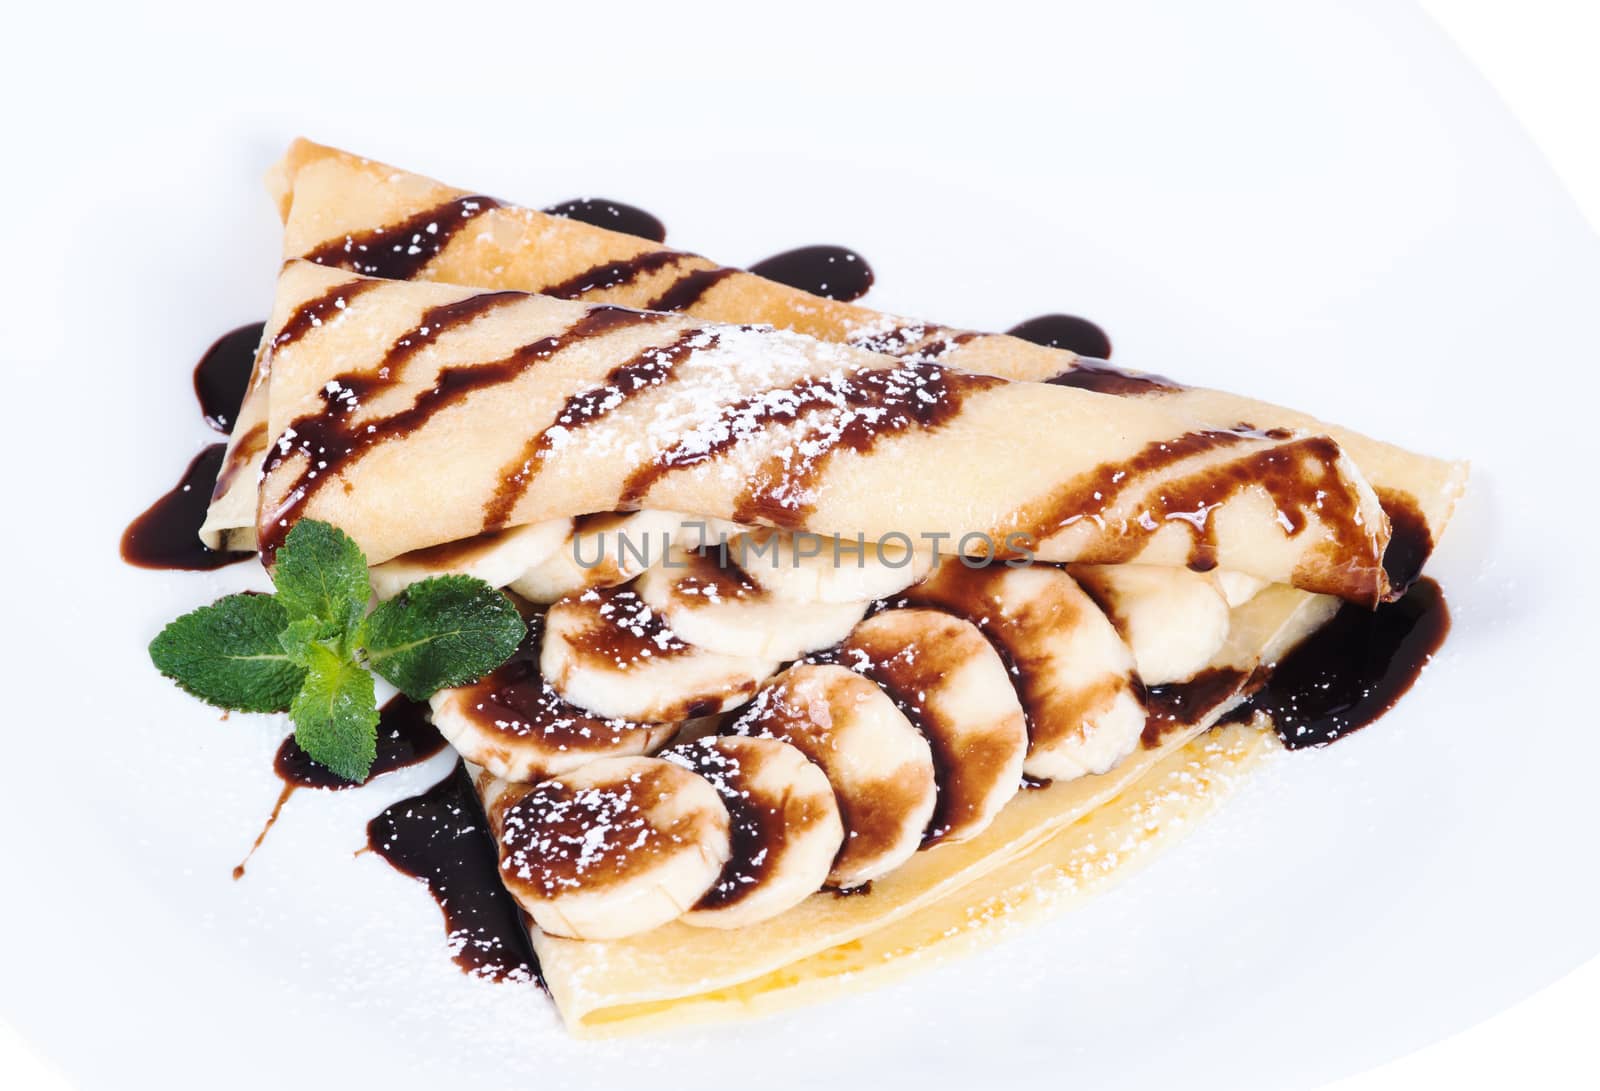 Pancakes stuffed bananas and chocolate on a plate, isolated